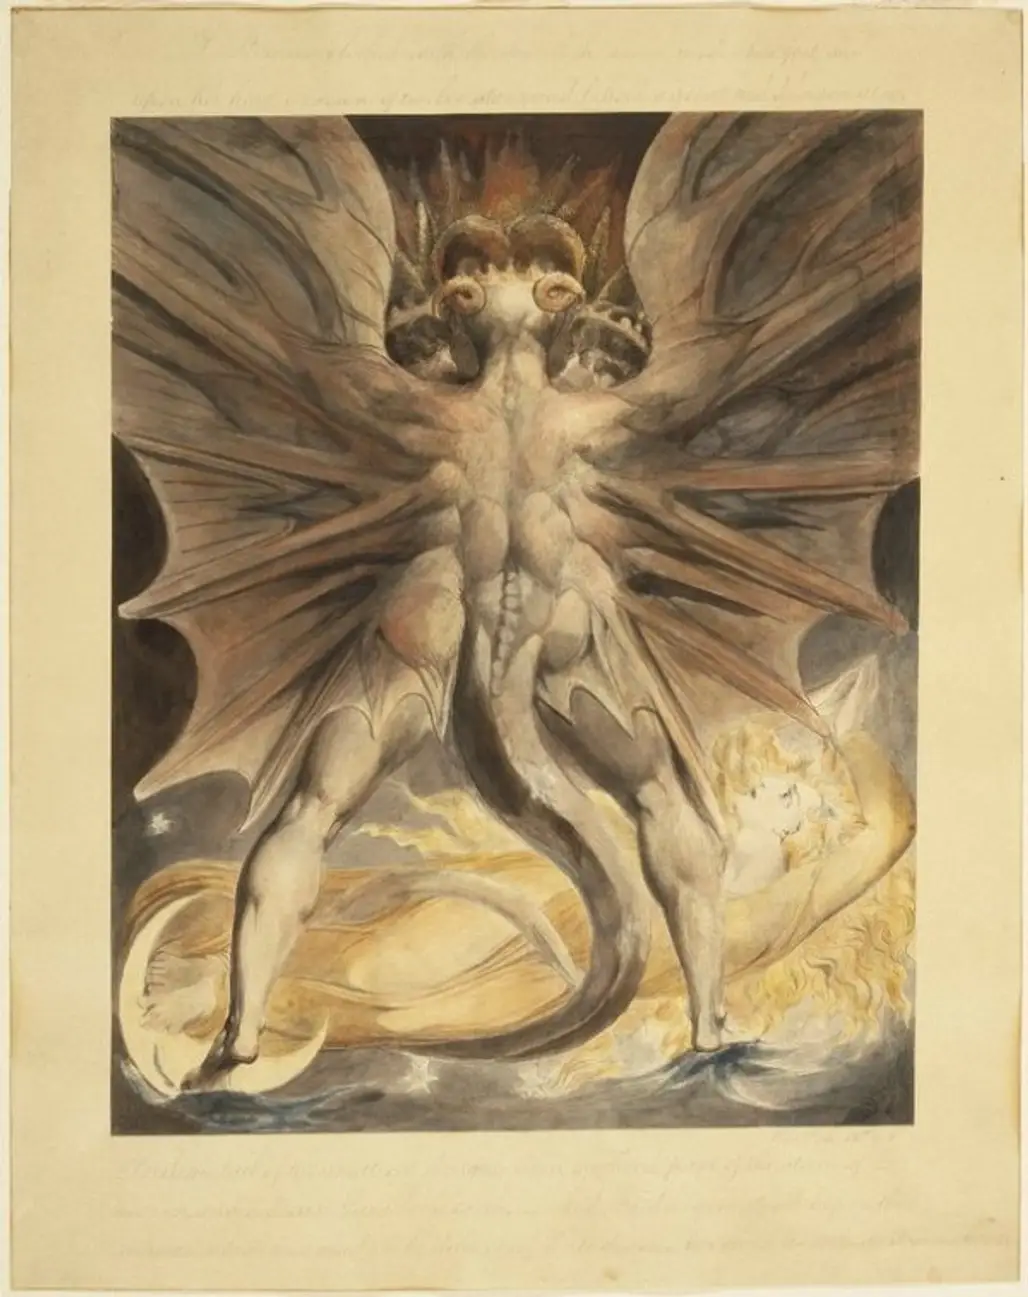 “the Great Red Dragon and the Woman Clothed by the Sun” by William Blake